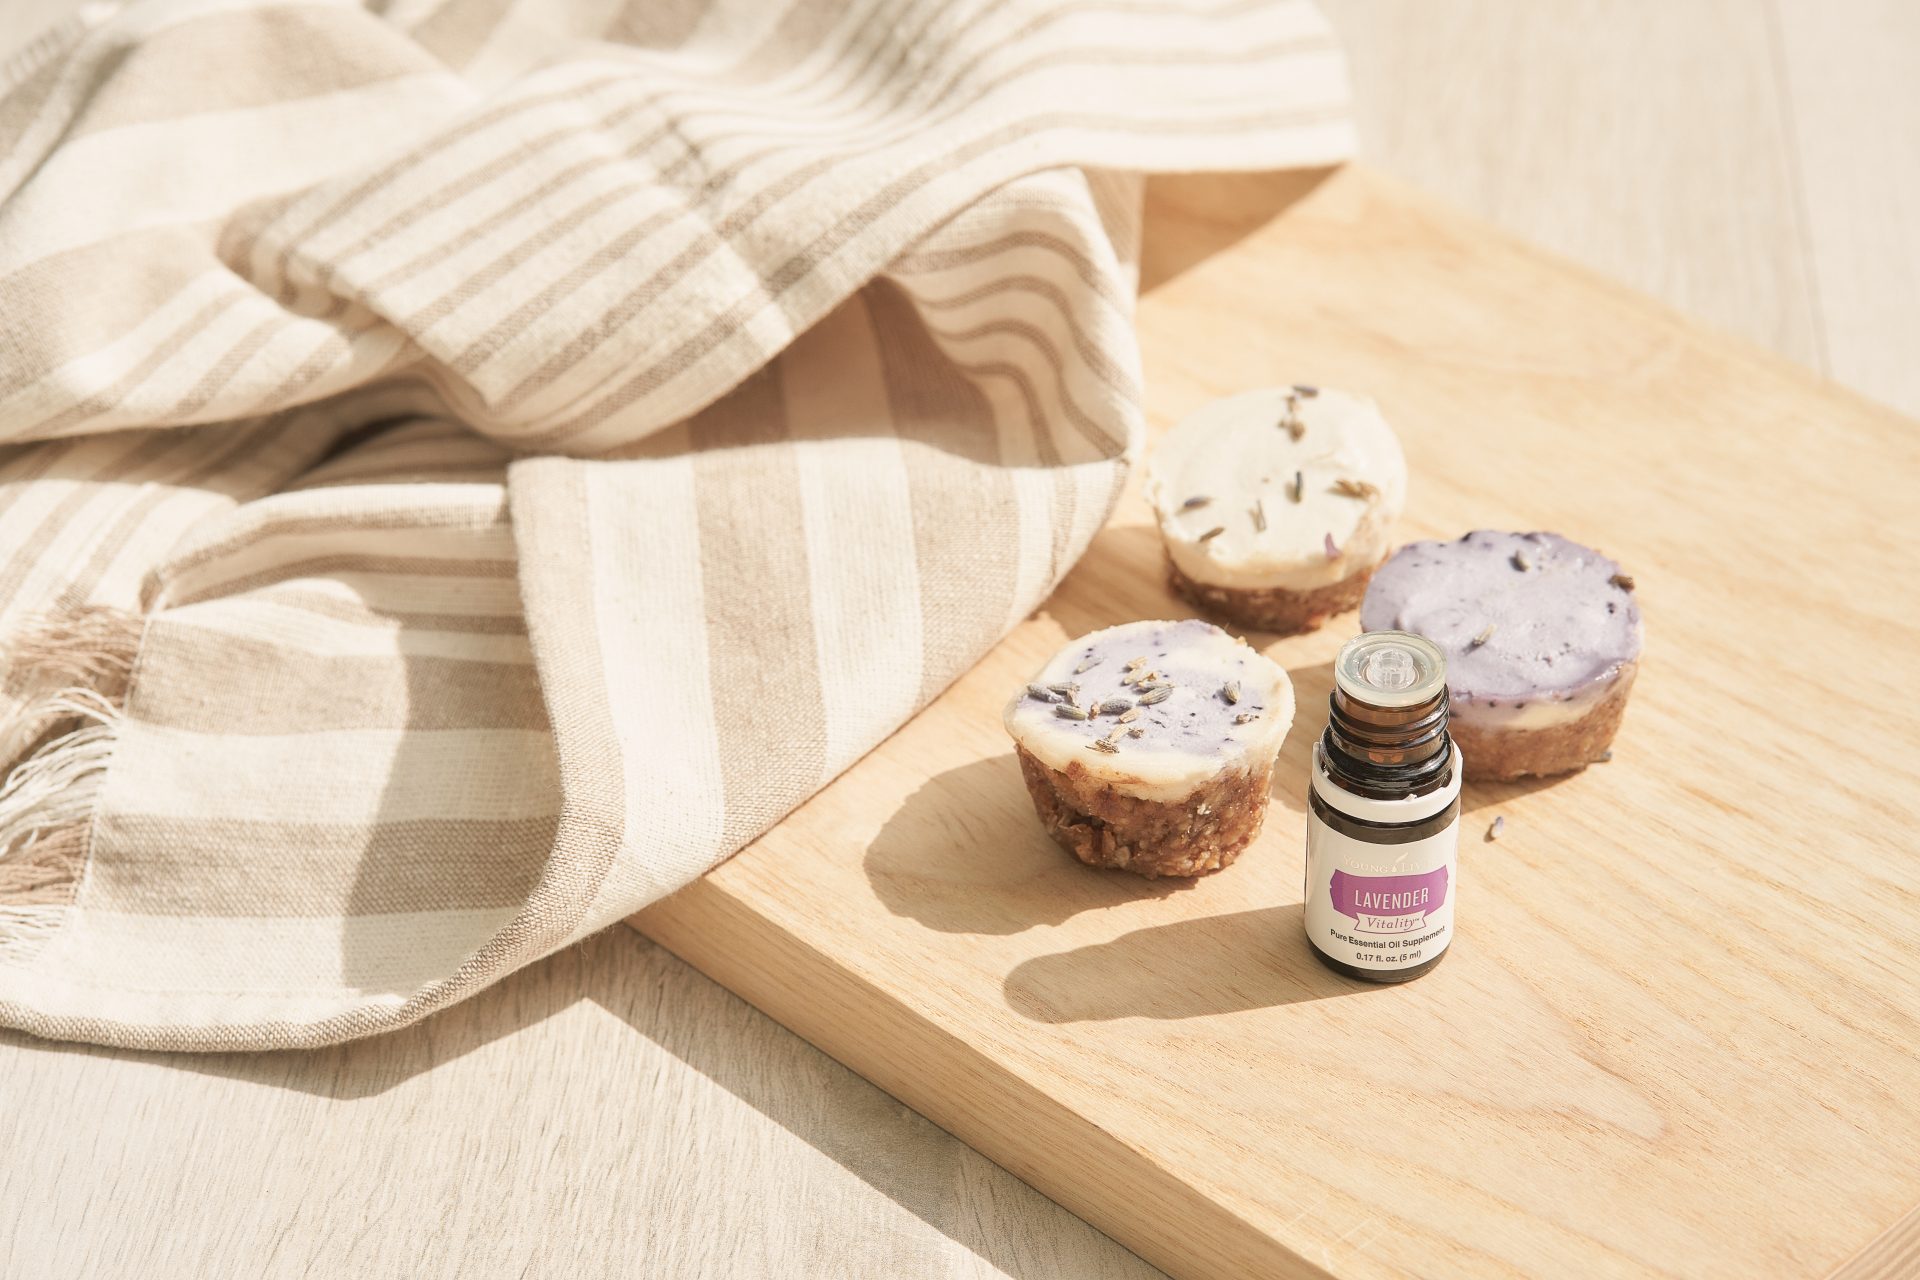 No-bake blueberry-lavender cheesecake - Young Living Lavender Life Blog 